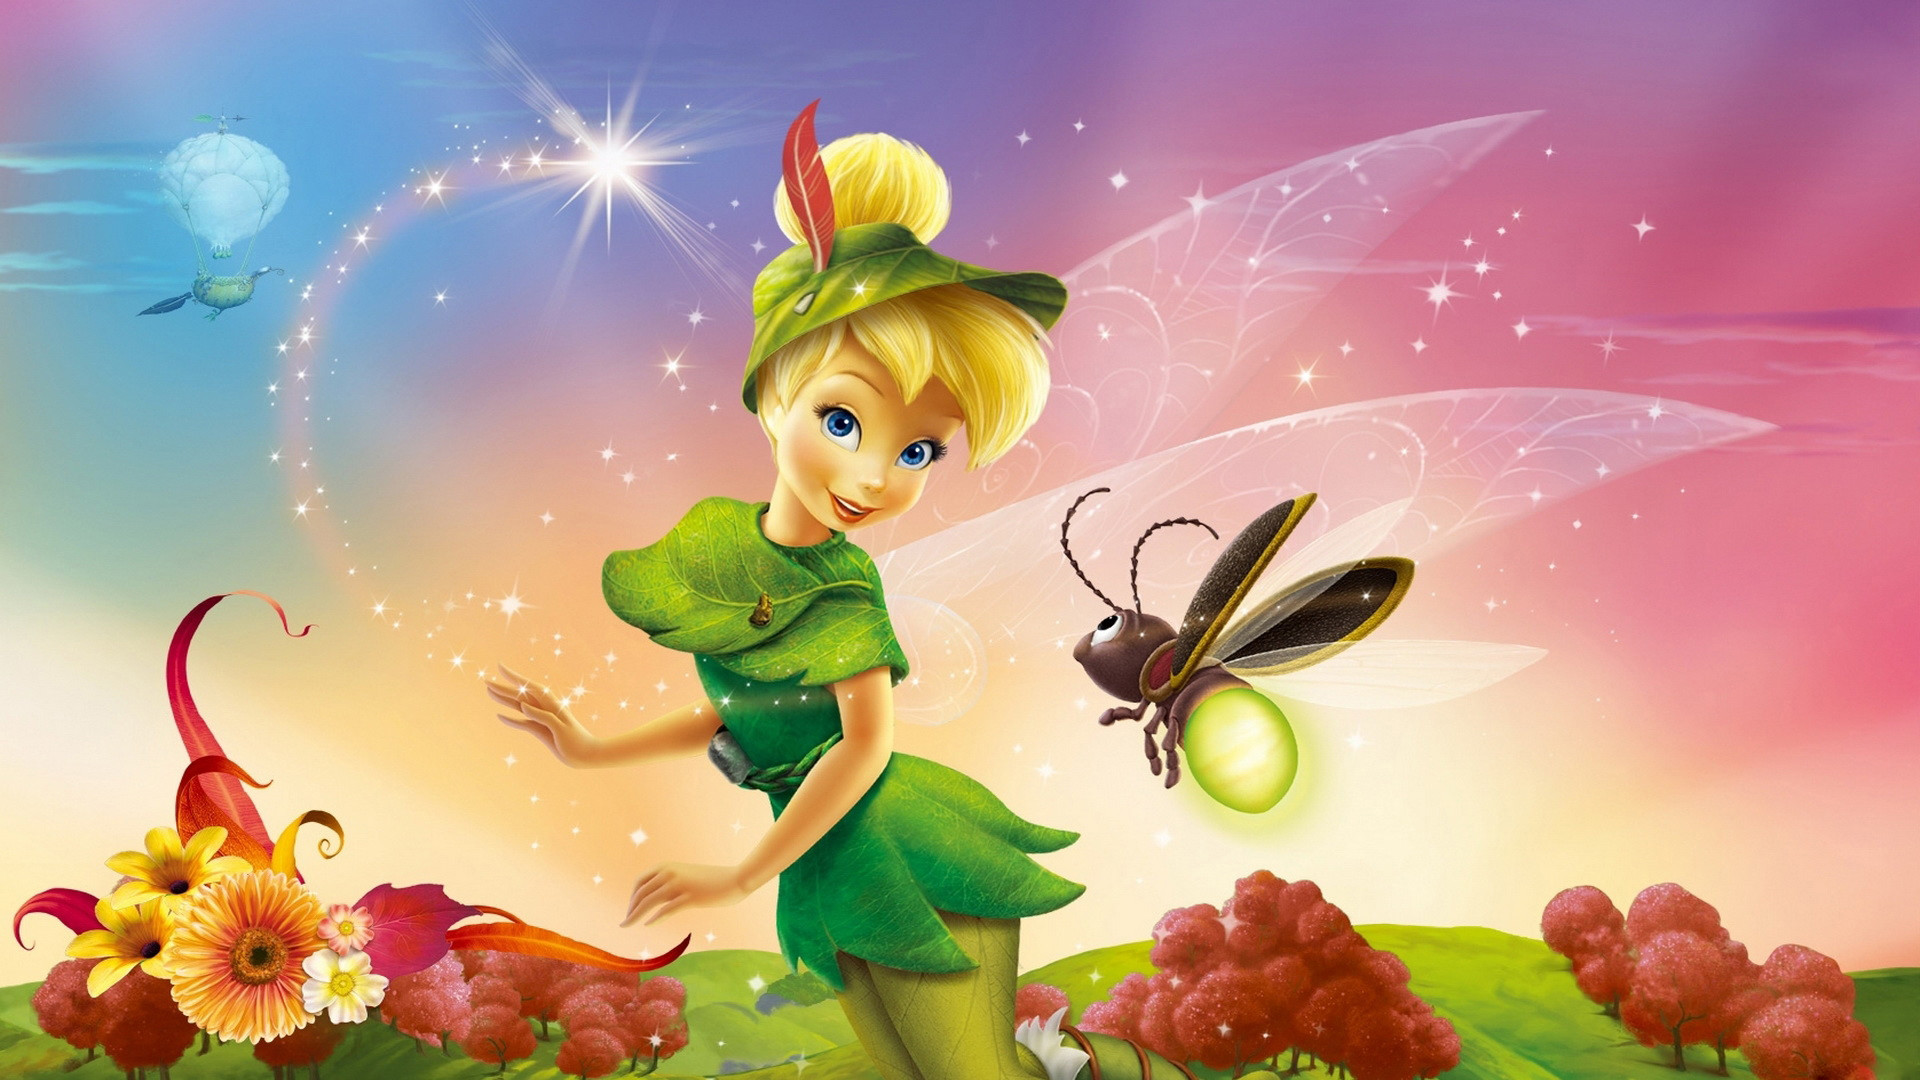 1920x1080 Best Animation movies - Peter Pan - Tinker Bell - New